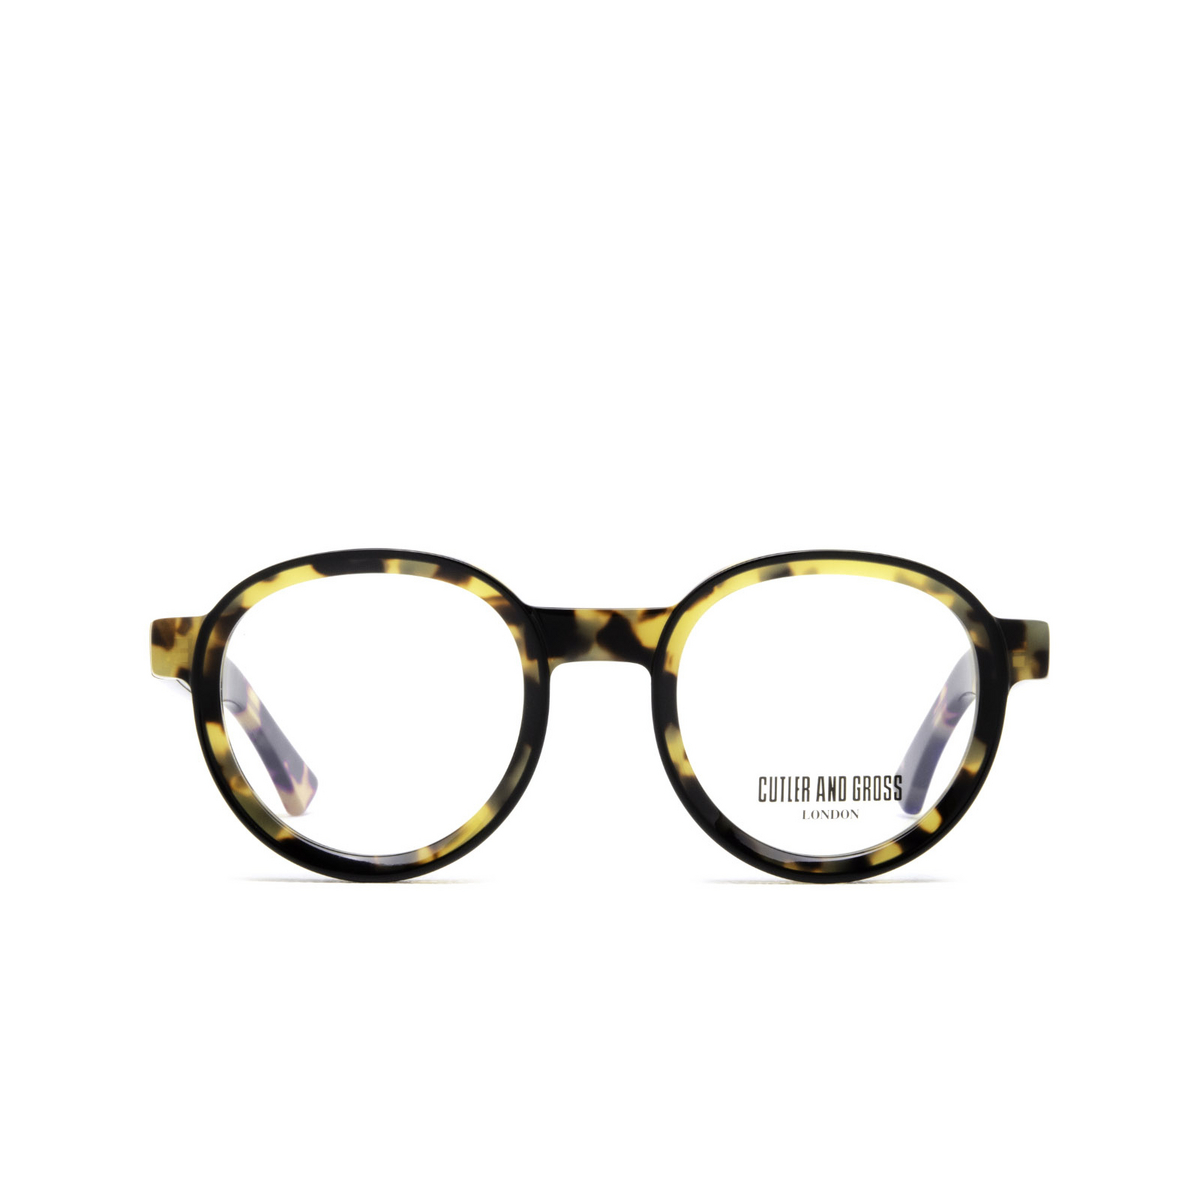 Cutler and Gross 1384 Eyeglasses 03 Black on Camo - front view